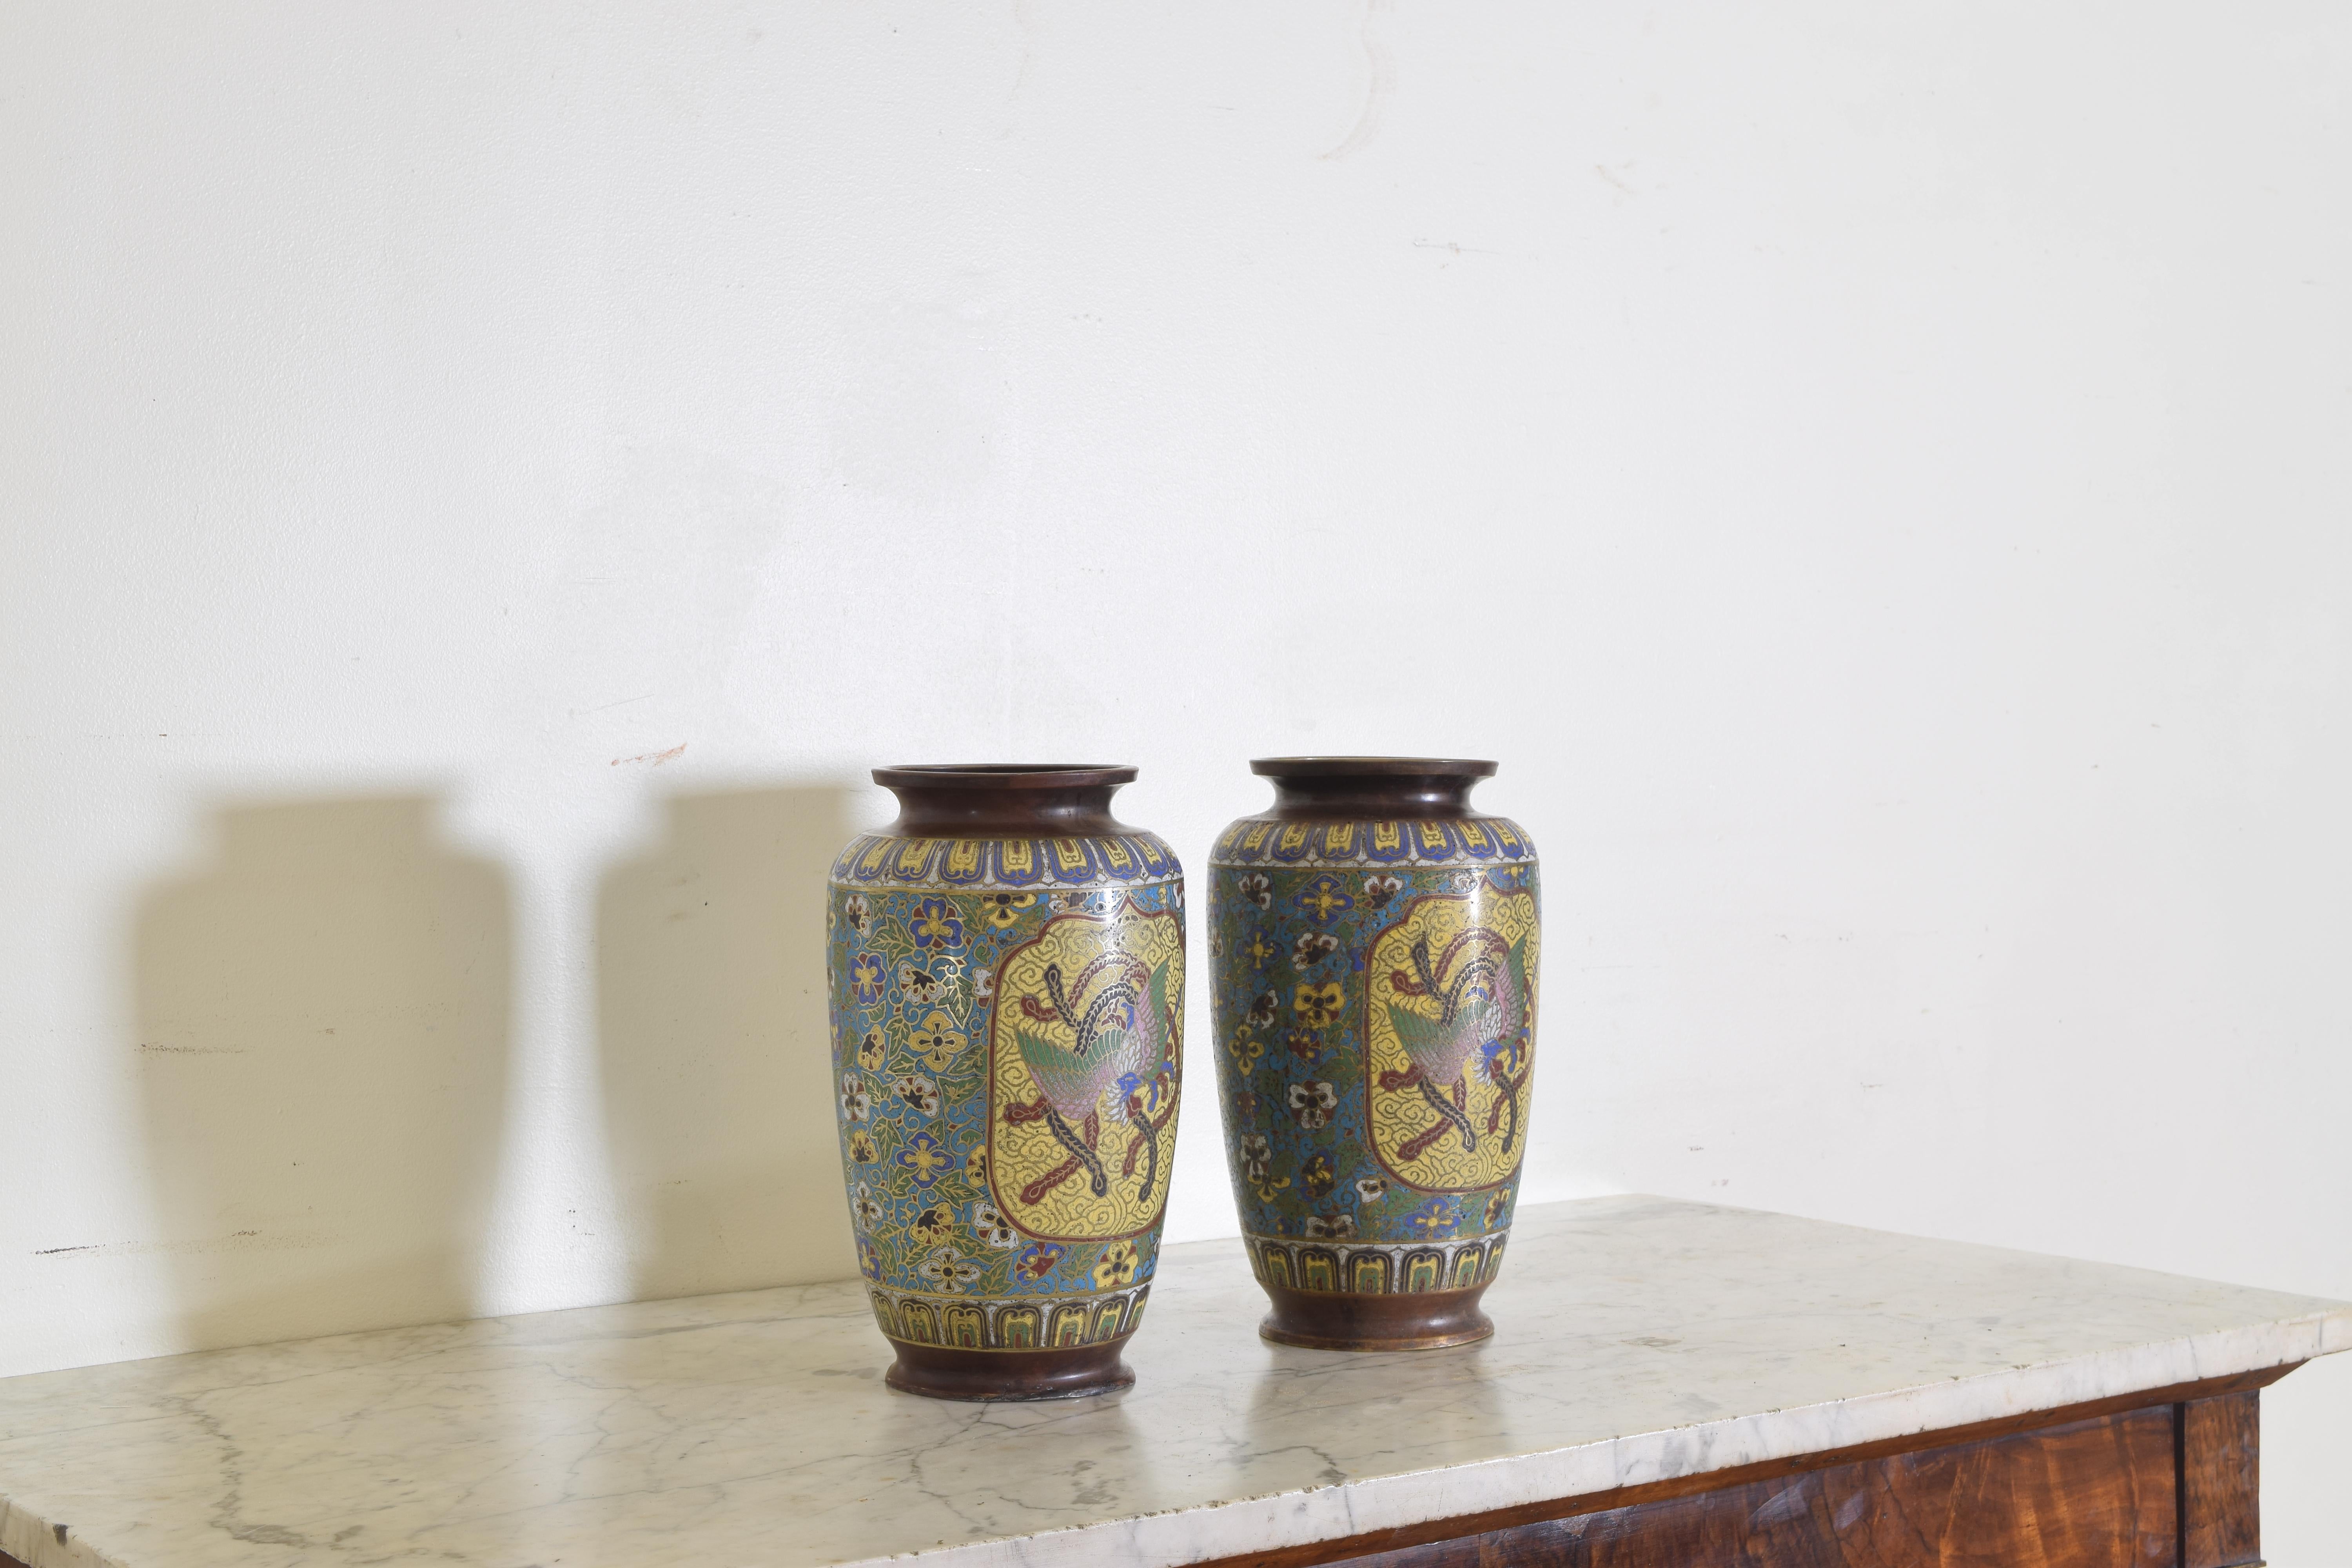 19th Century Pair of Cloisonné Multicolored Vases with Birds, Flowers, and Serpents